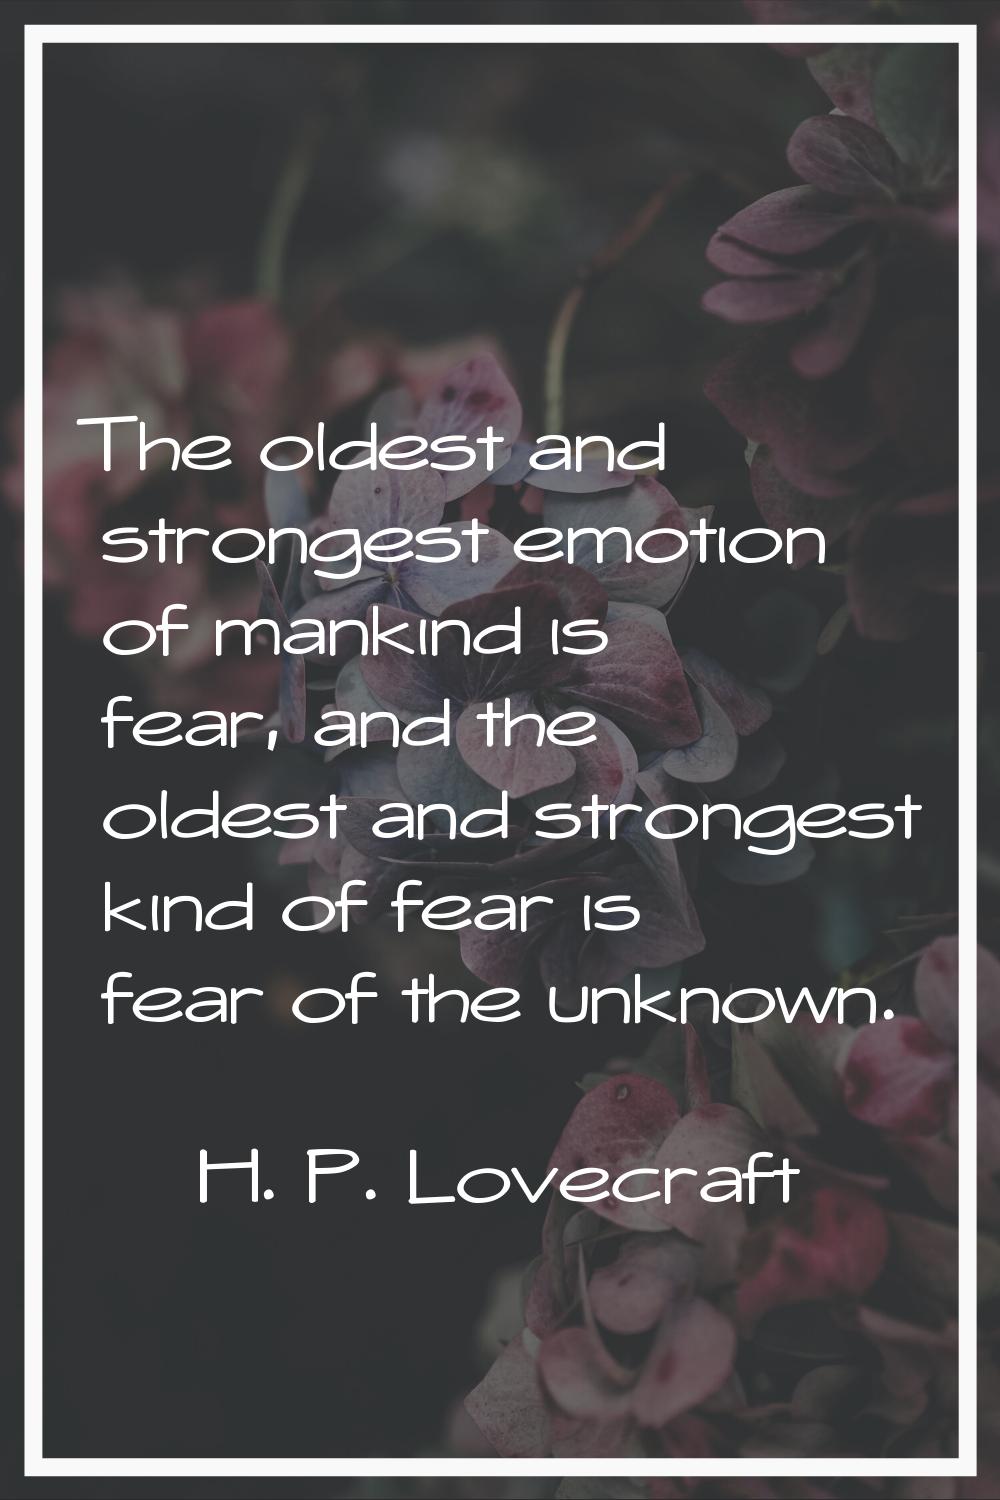 The oldest and strongest emotion of mankind is fear, and the oldest and strongest kind of fear is f